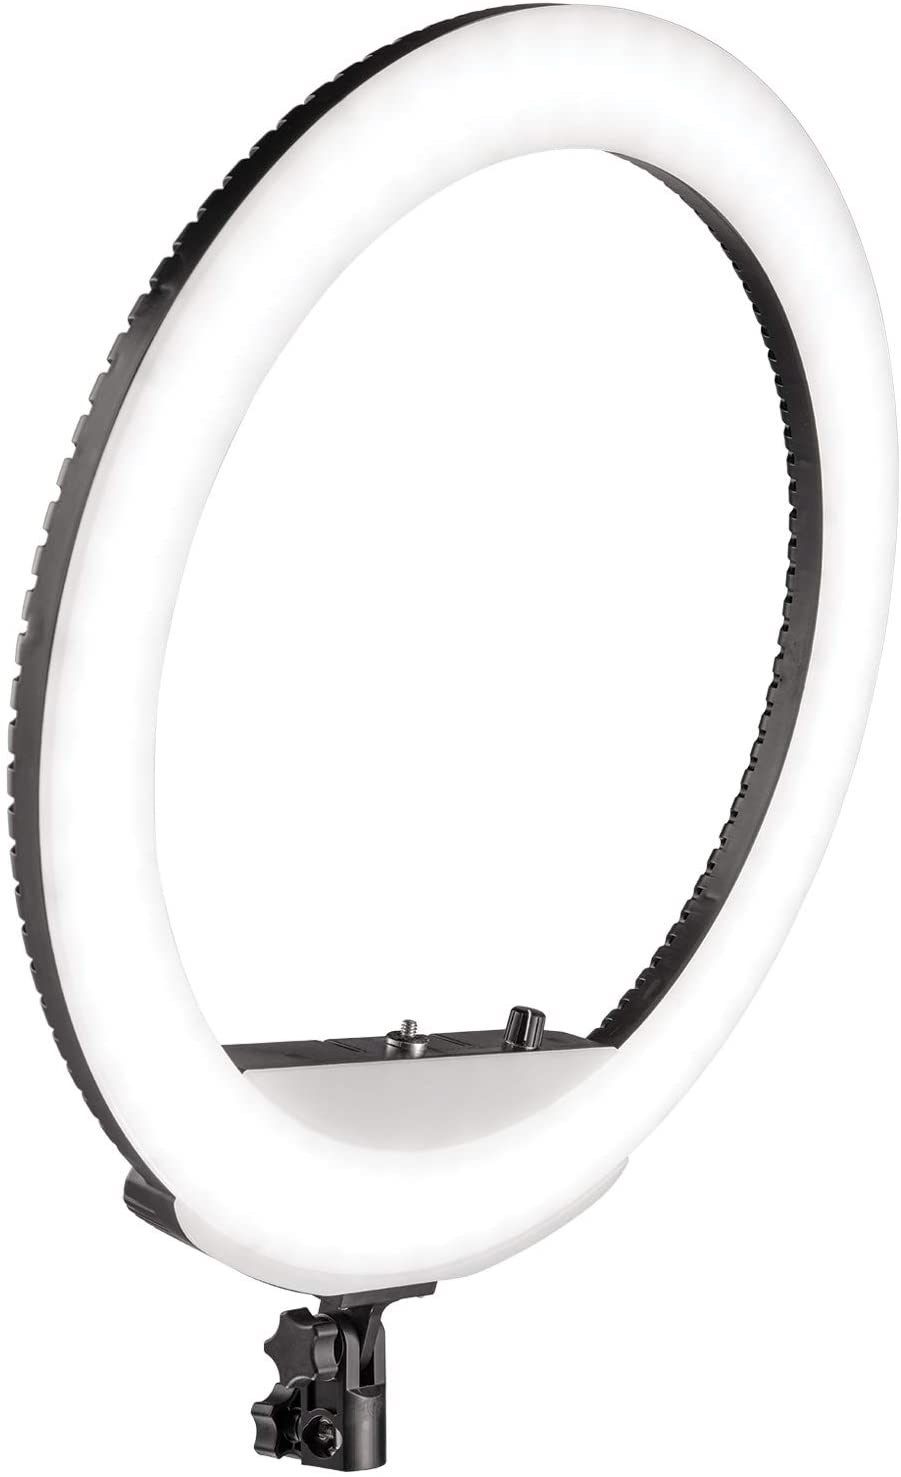 Westcott 18" Bi-Colour LED Ring Light Kit Perfect for Photography, Video Conferencing, YouTube Vlogging and TikTok